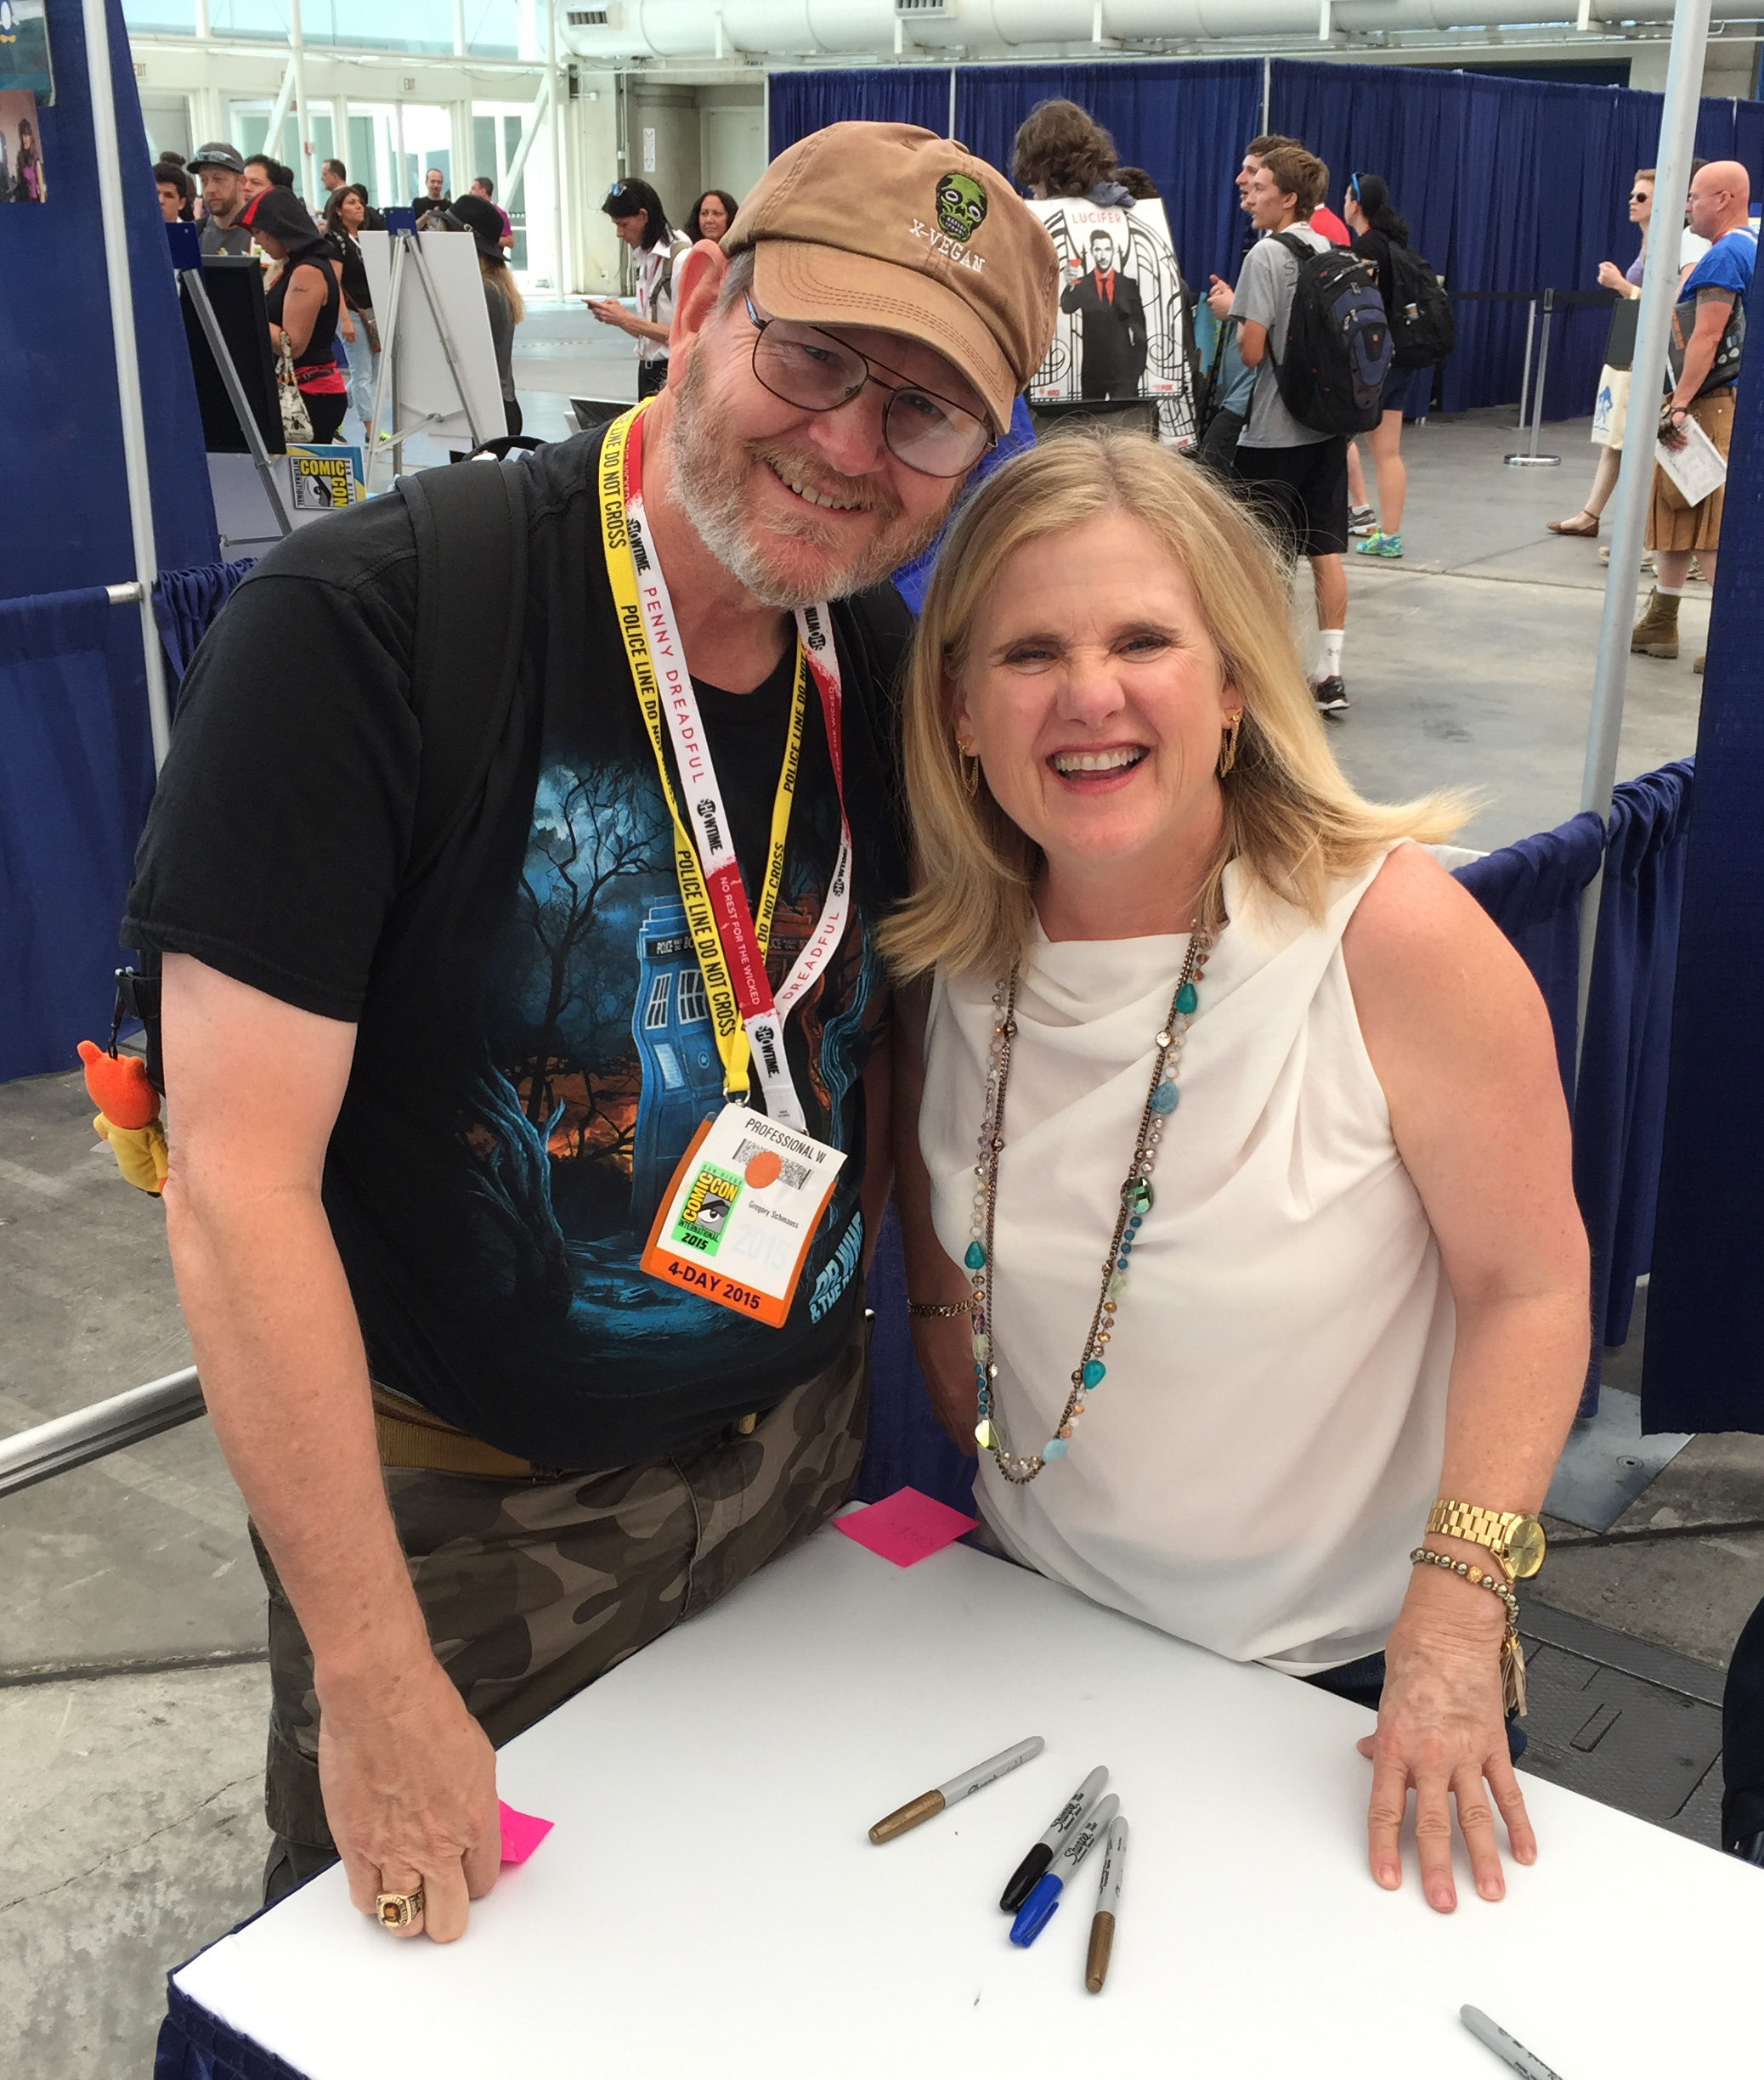 Gregory Schmauss with Nancy Cartwright (Voice of Bart Simpson) at the 2015 San Diego Comic-Con.